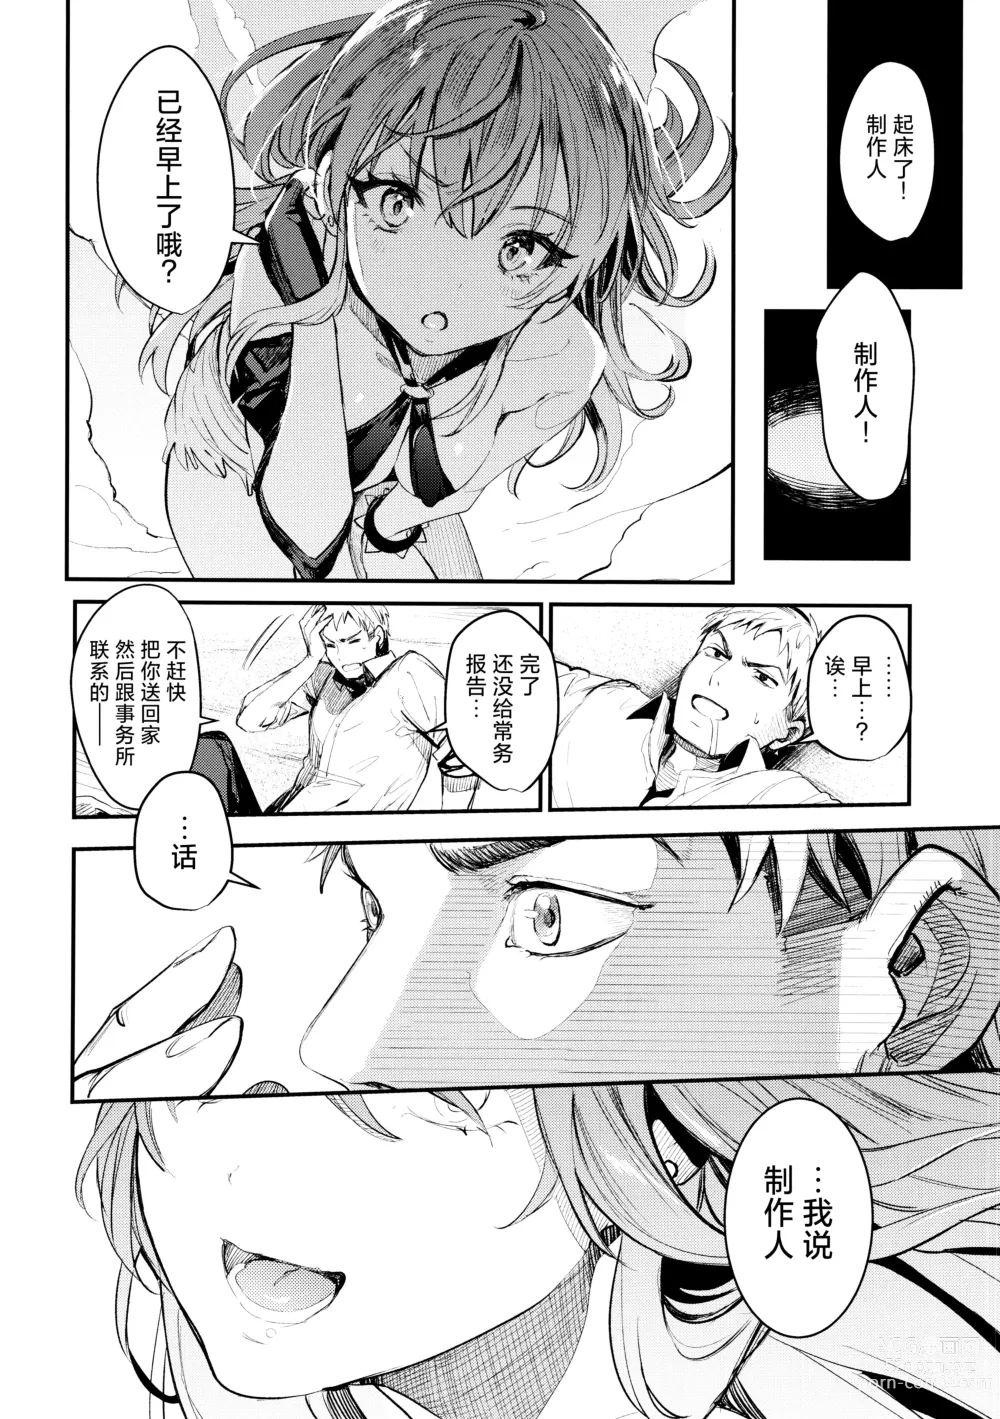 Page 28 of doujinshi 与美嘉两个人。